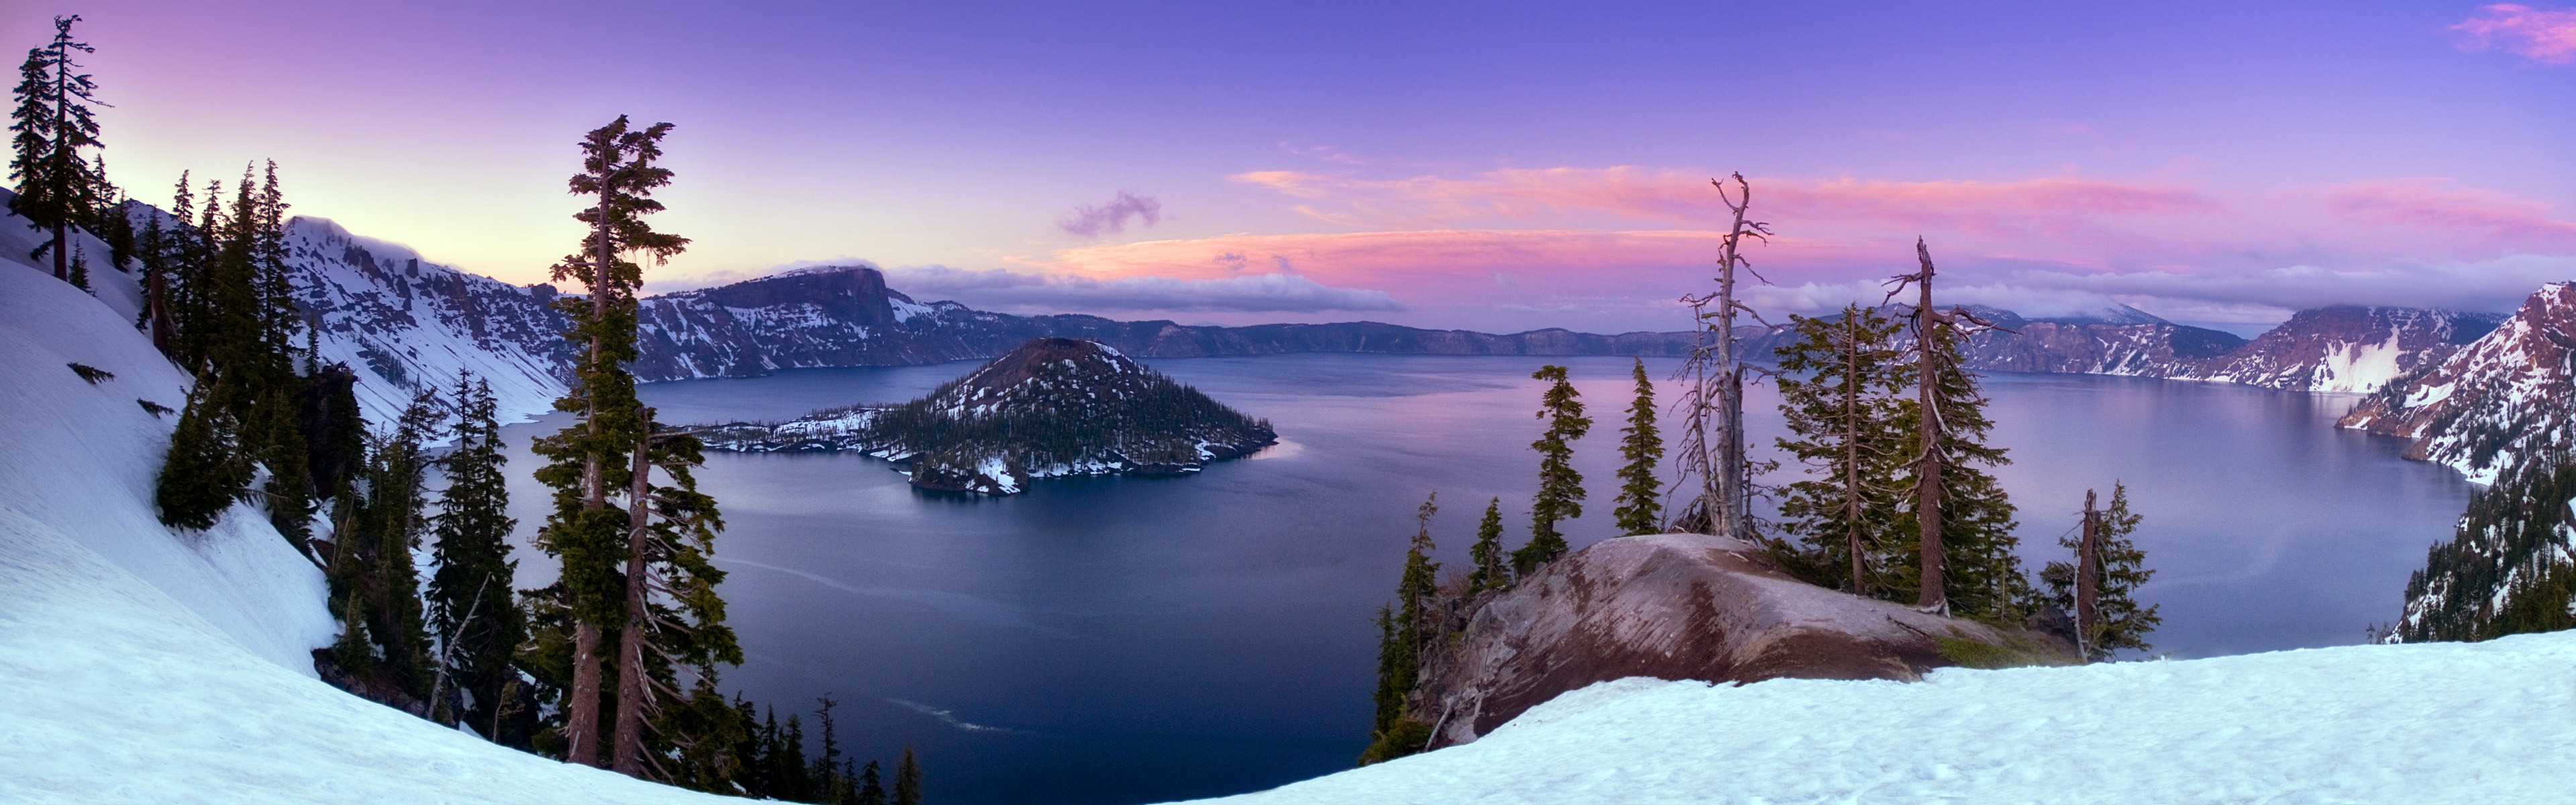 Windows 8 official panoramic wallpaper, waves, forests, majestic mountains #19 - 3840x1200